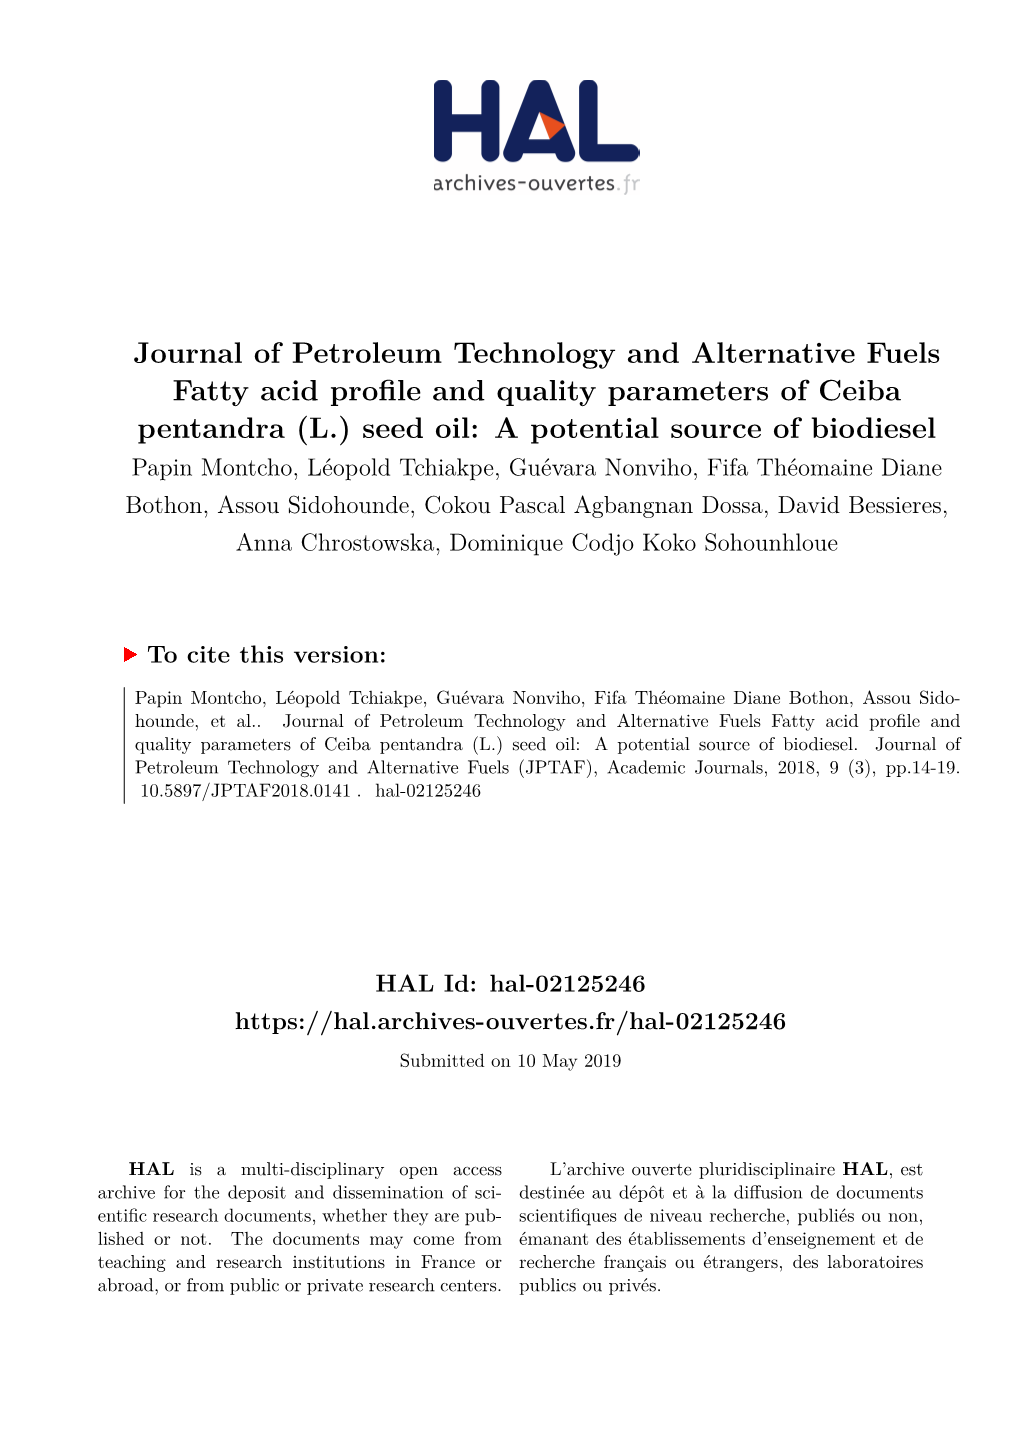 Journal of Petroleum Technology and Alternative Fuels Fatty Acid Profile and Quality Parameters of Ceiba Pentandra